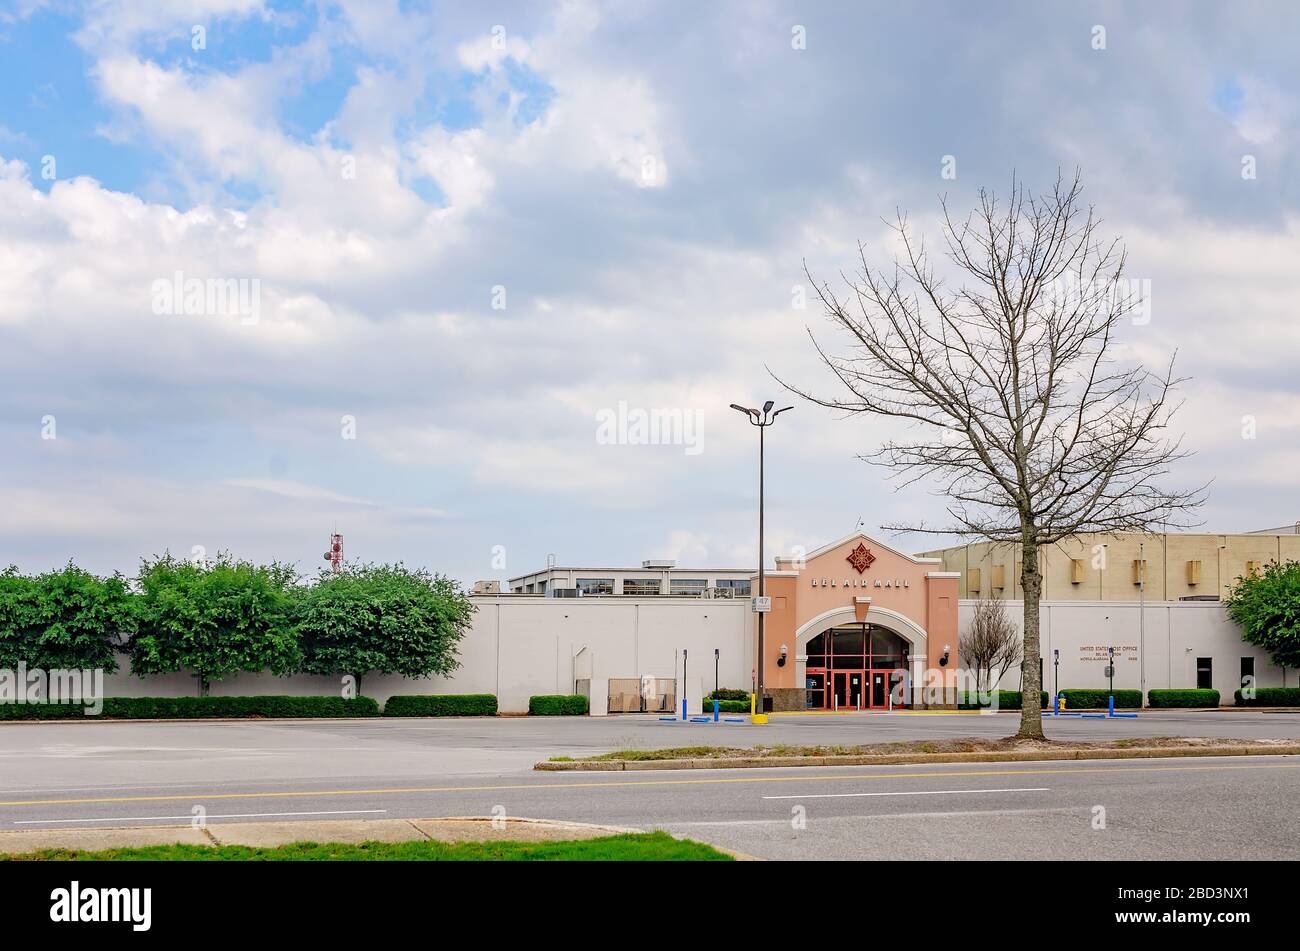 The Bel Air Mall parking lot is deserted during the COVID-19 pandemic, March 29, 2020, in Mobile, Alabama. Stock Photo